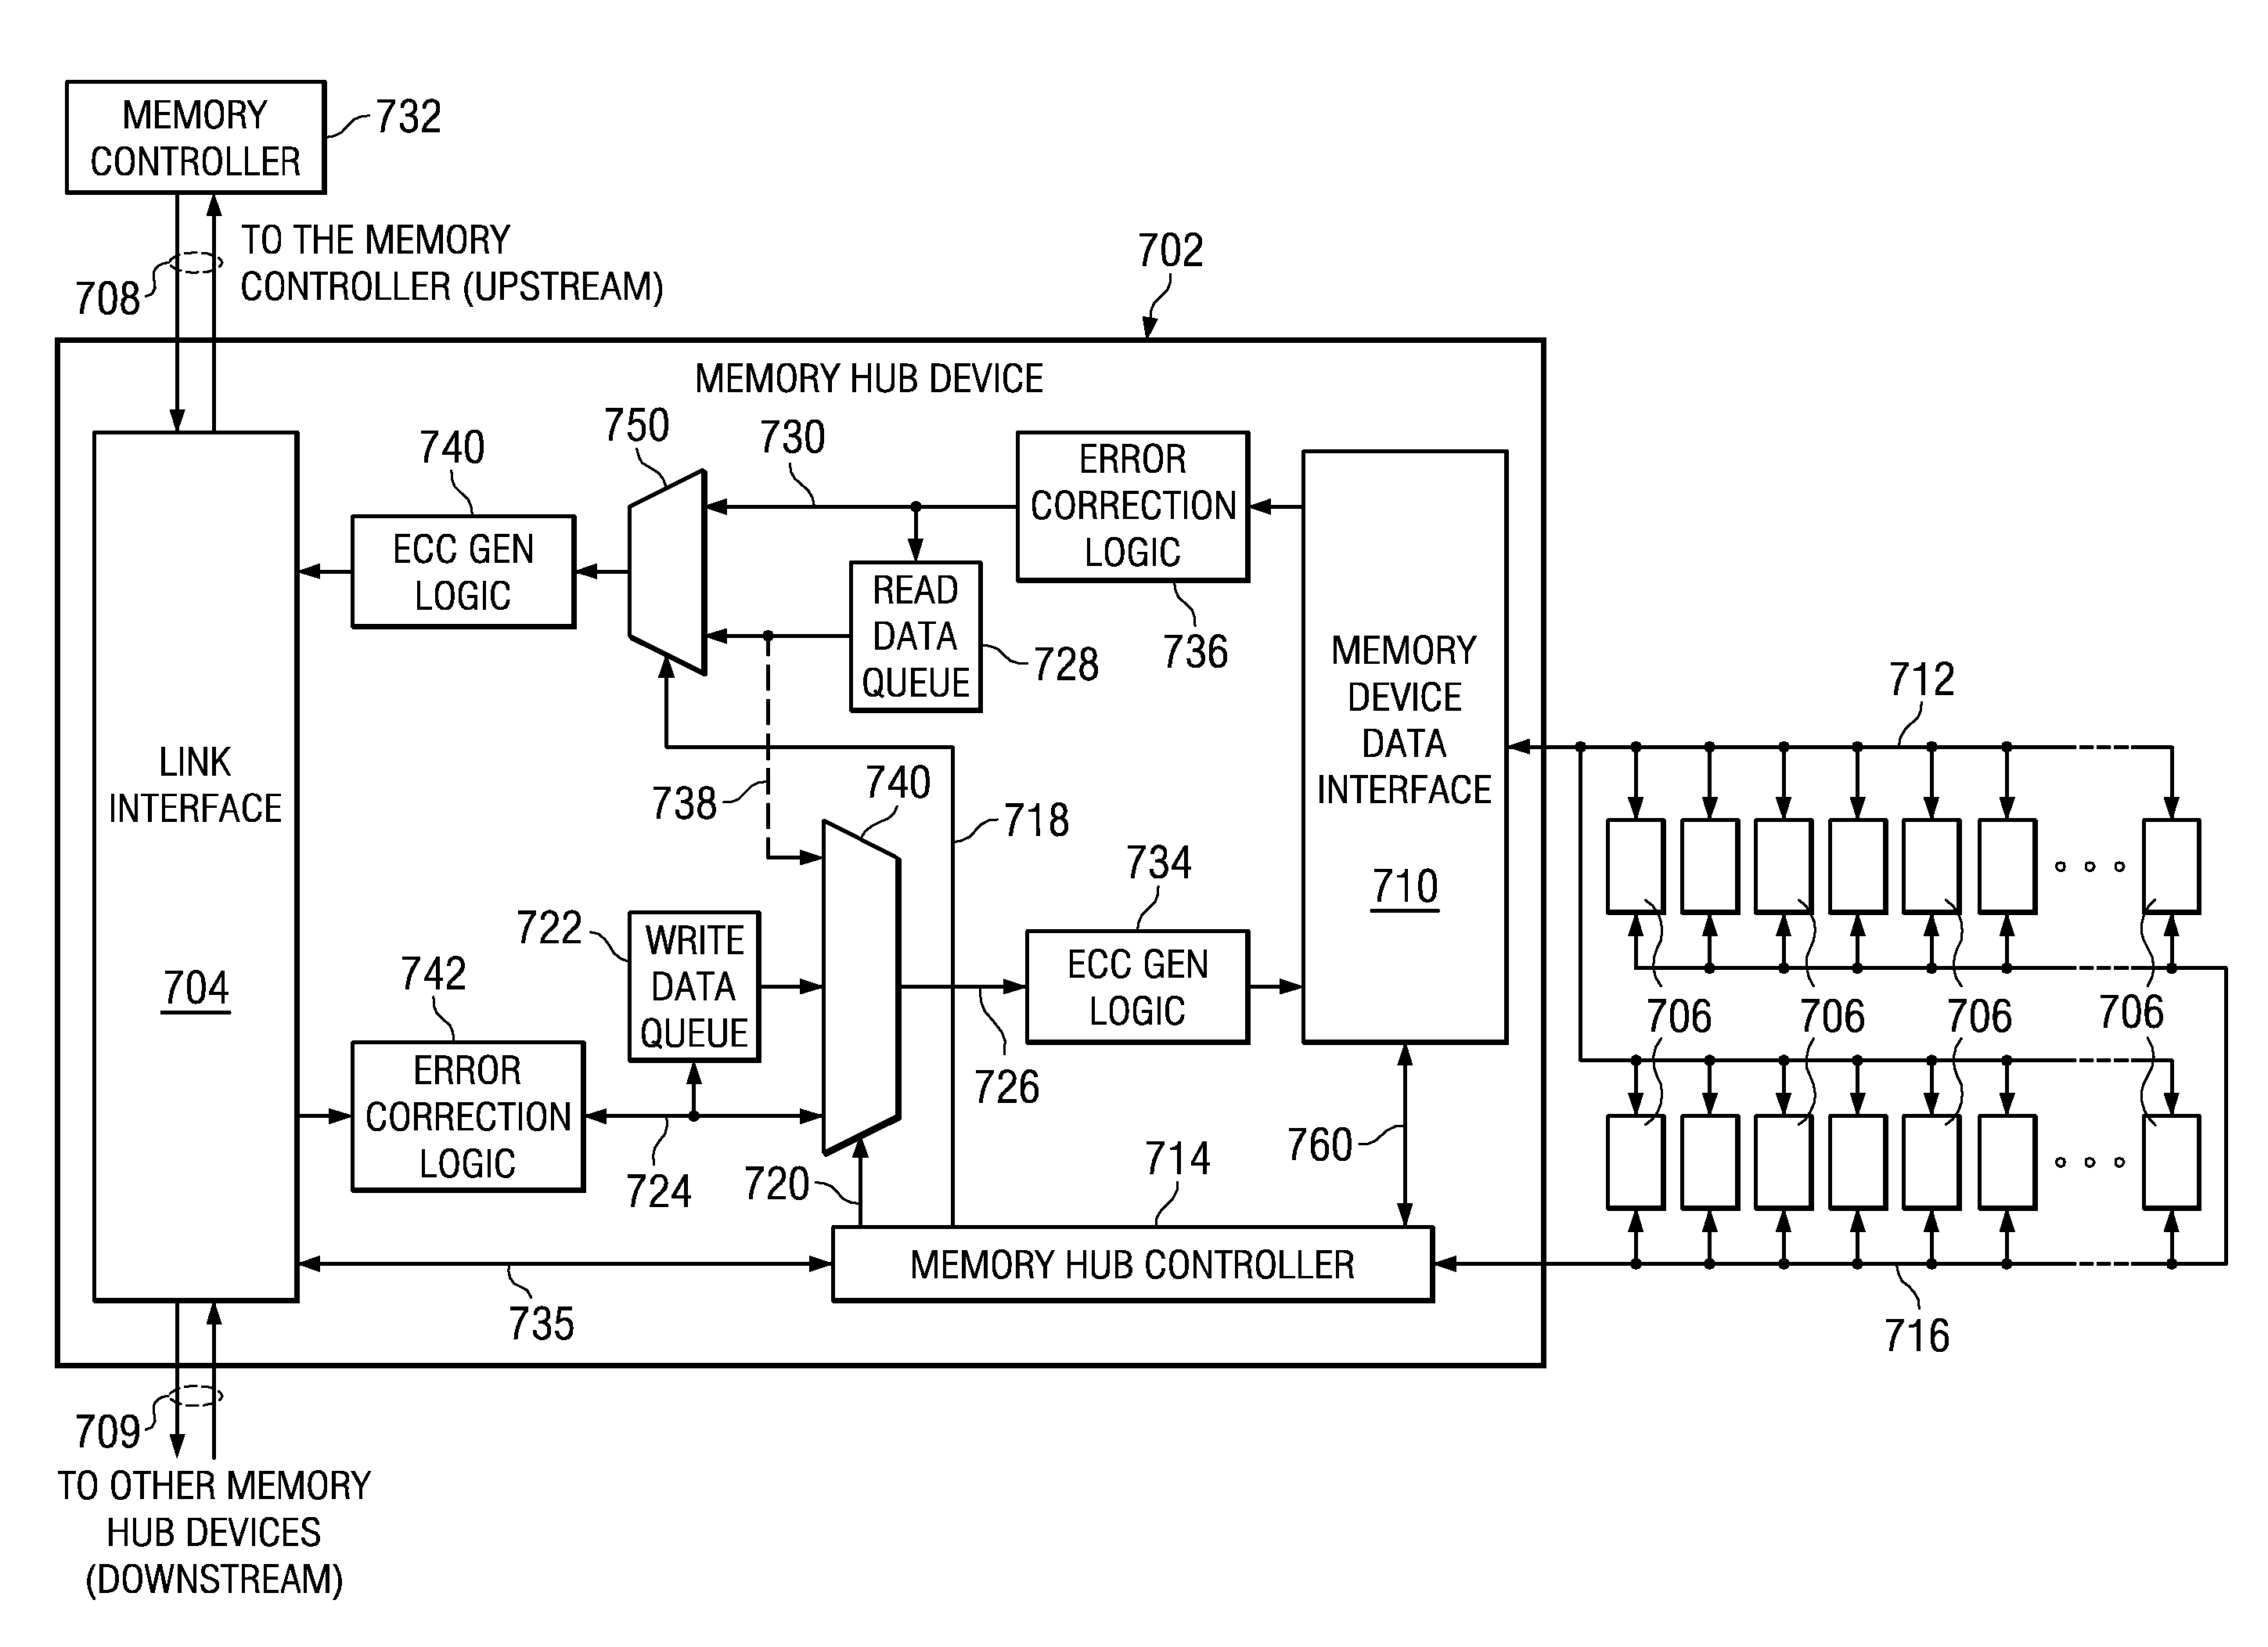 Performing error correction at a memory device level that is transparent to a memory channel